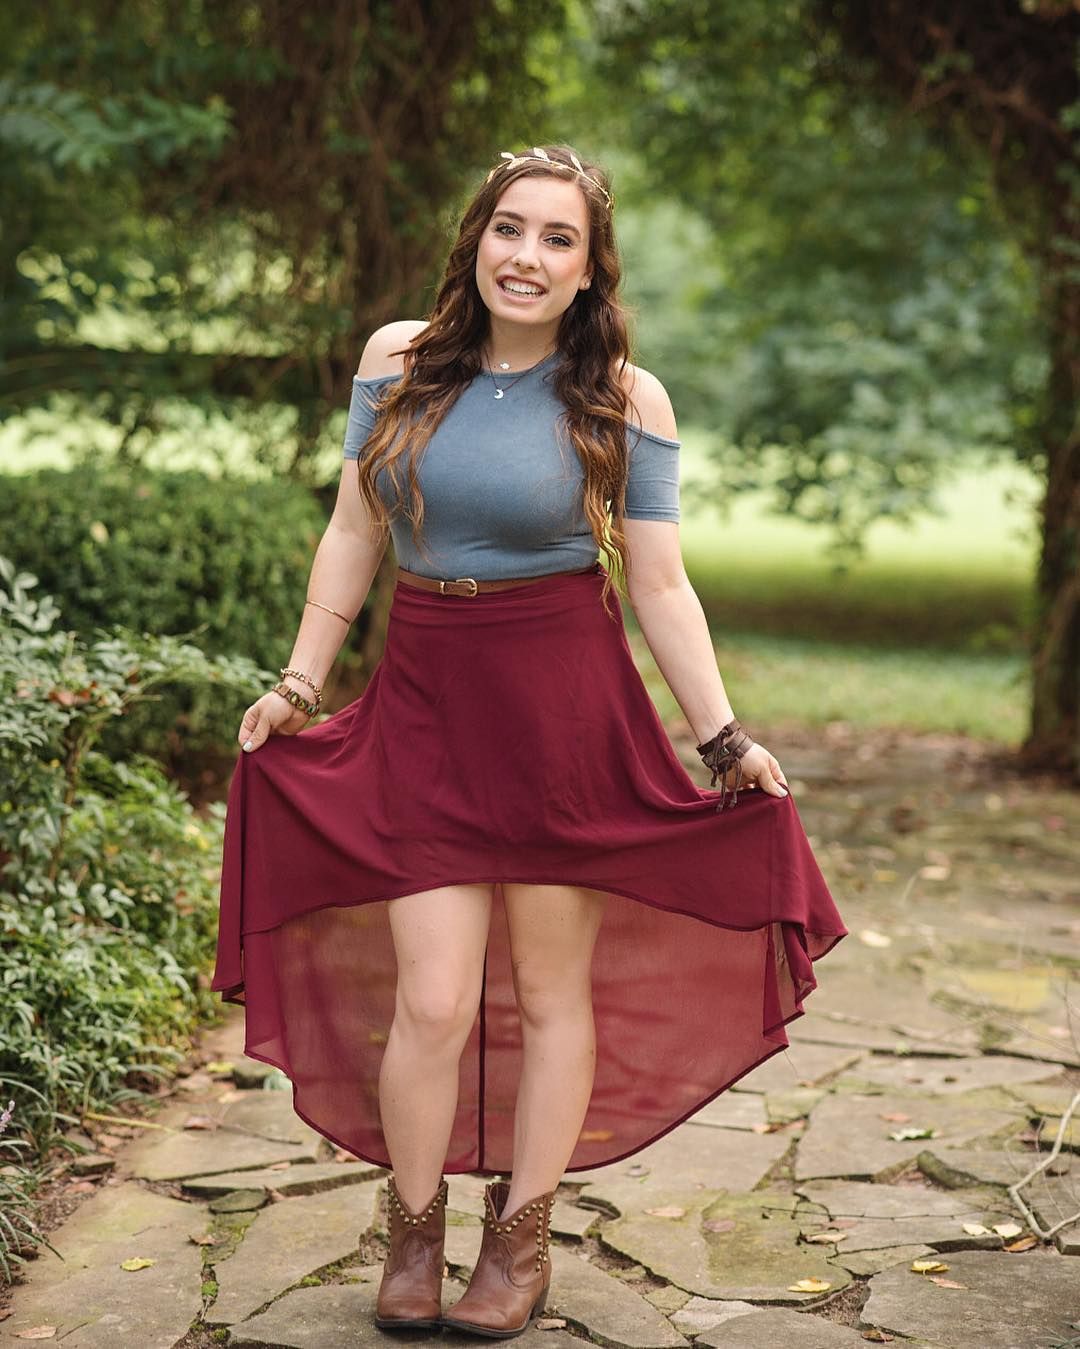 Amy Cimorelli is living a happy life after the long battle with Turner Syndrome.